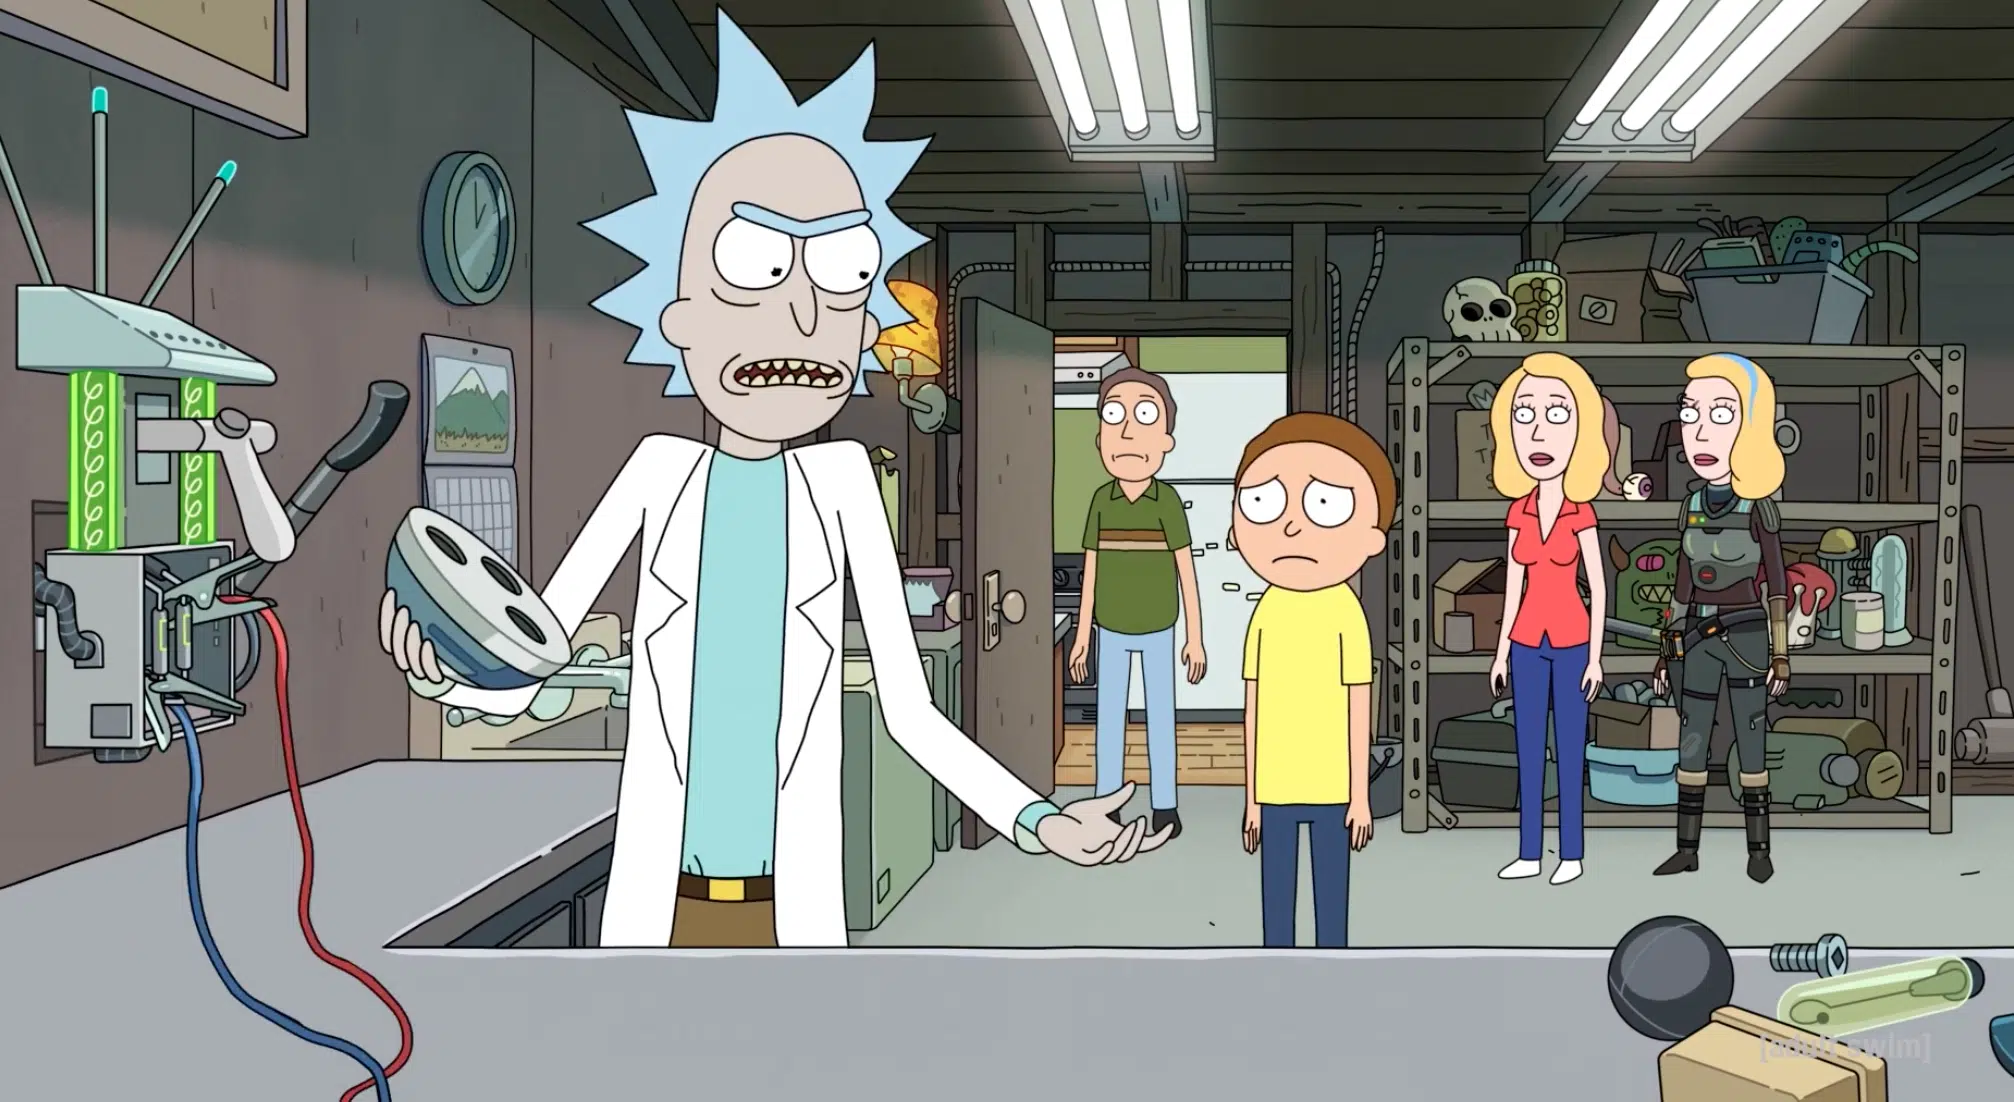 (Watch) First Official Trailer for "Rick and Morty" Season 6 Released